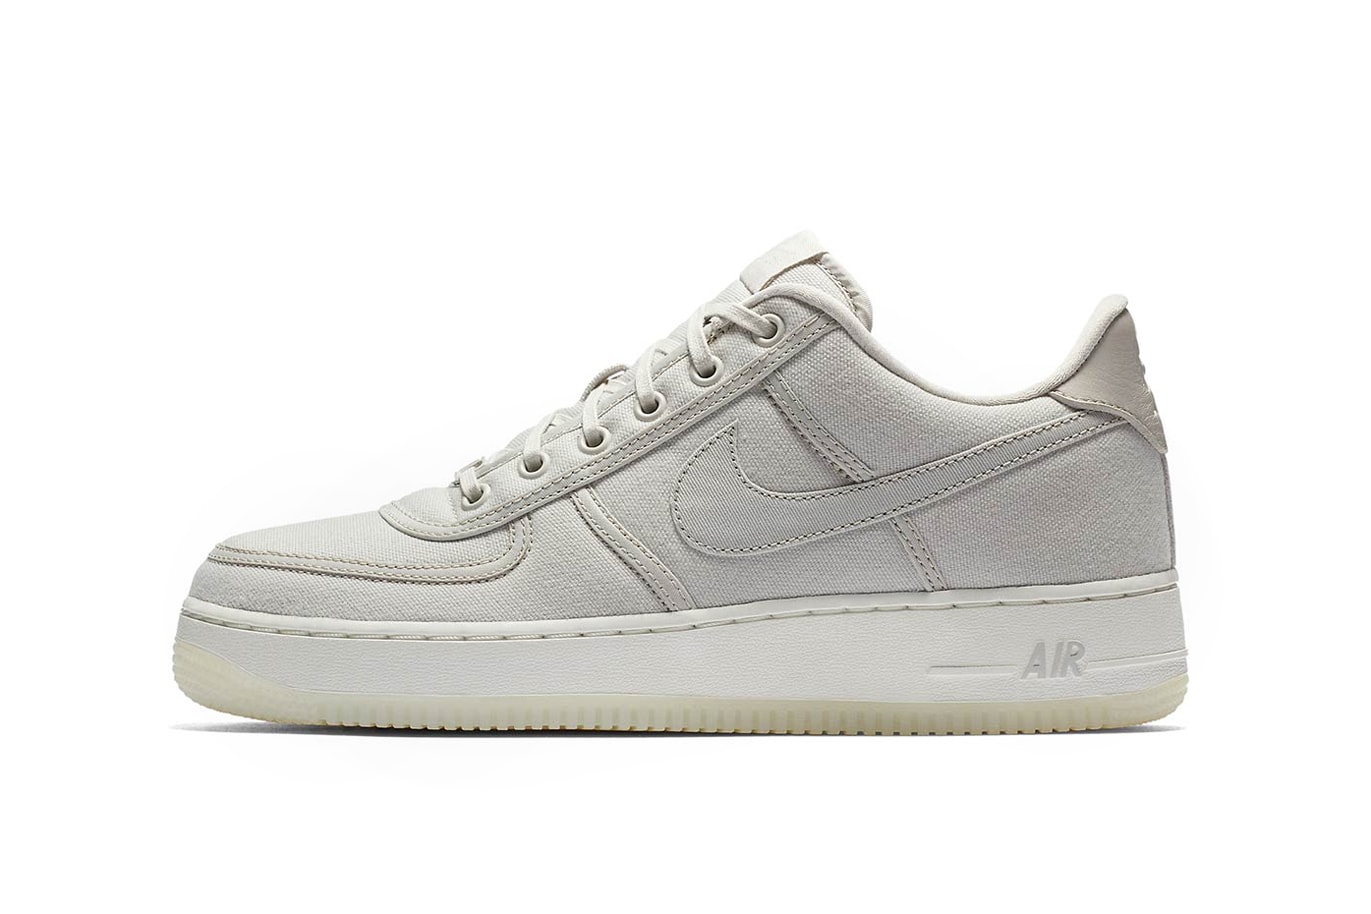 Nike Air Force 1 Low Splash of Designer - The Canvas Project, LLC